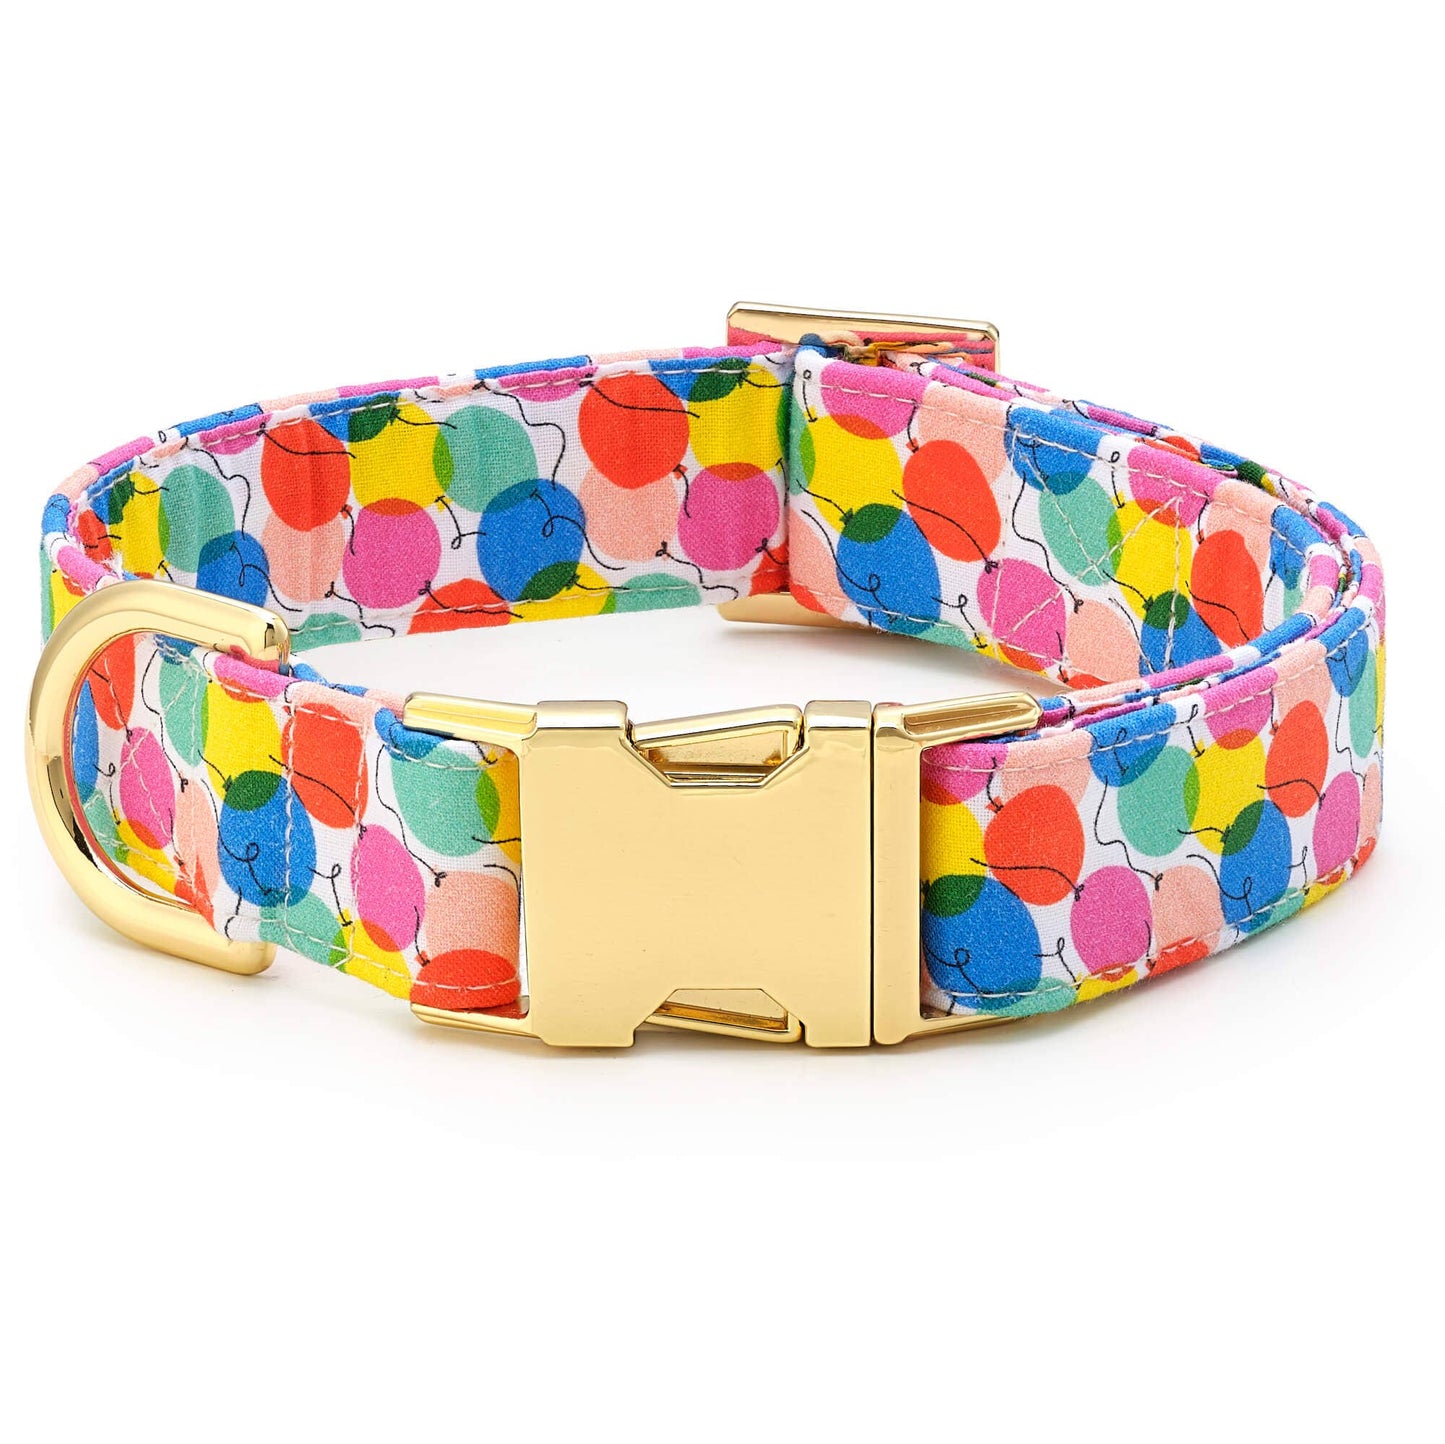 Pup, Pup, and Away Birthday Dog Collar: M/ Gold